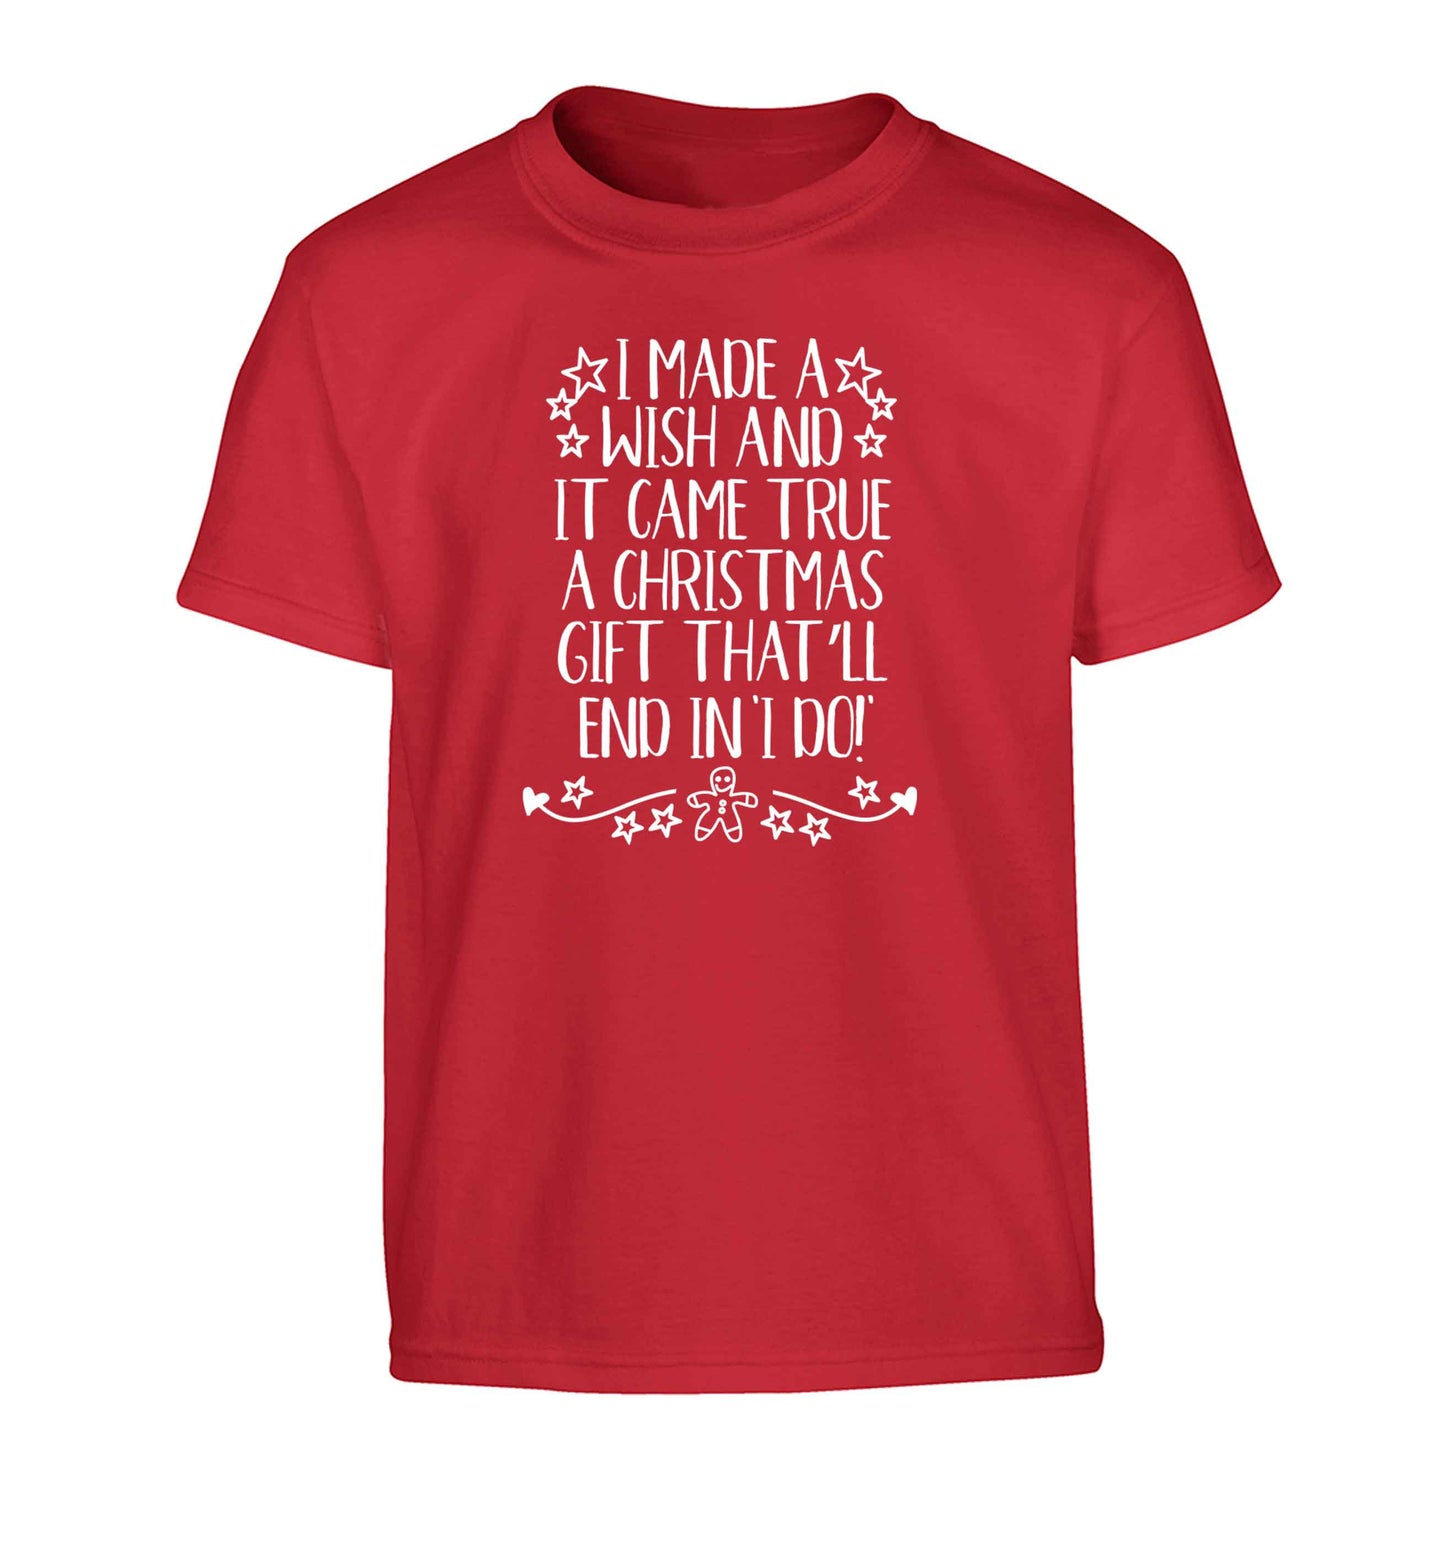 I made a wish and it came true a Christmas gift that'll end in 'I do' Children's red Tshirt 12-13 Years